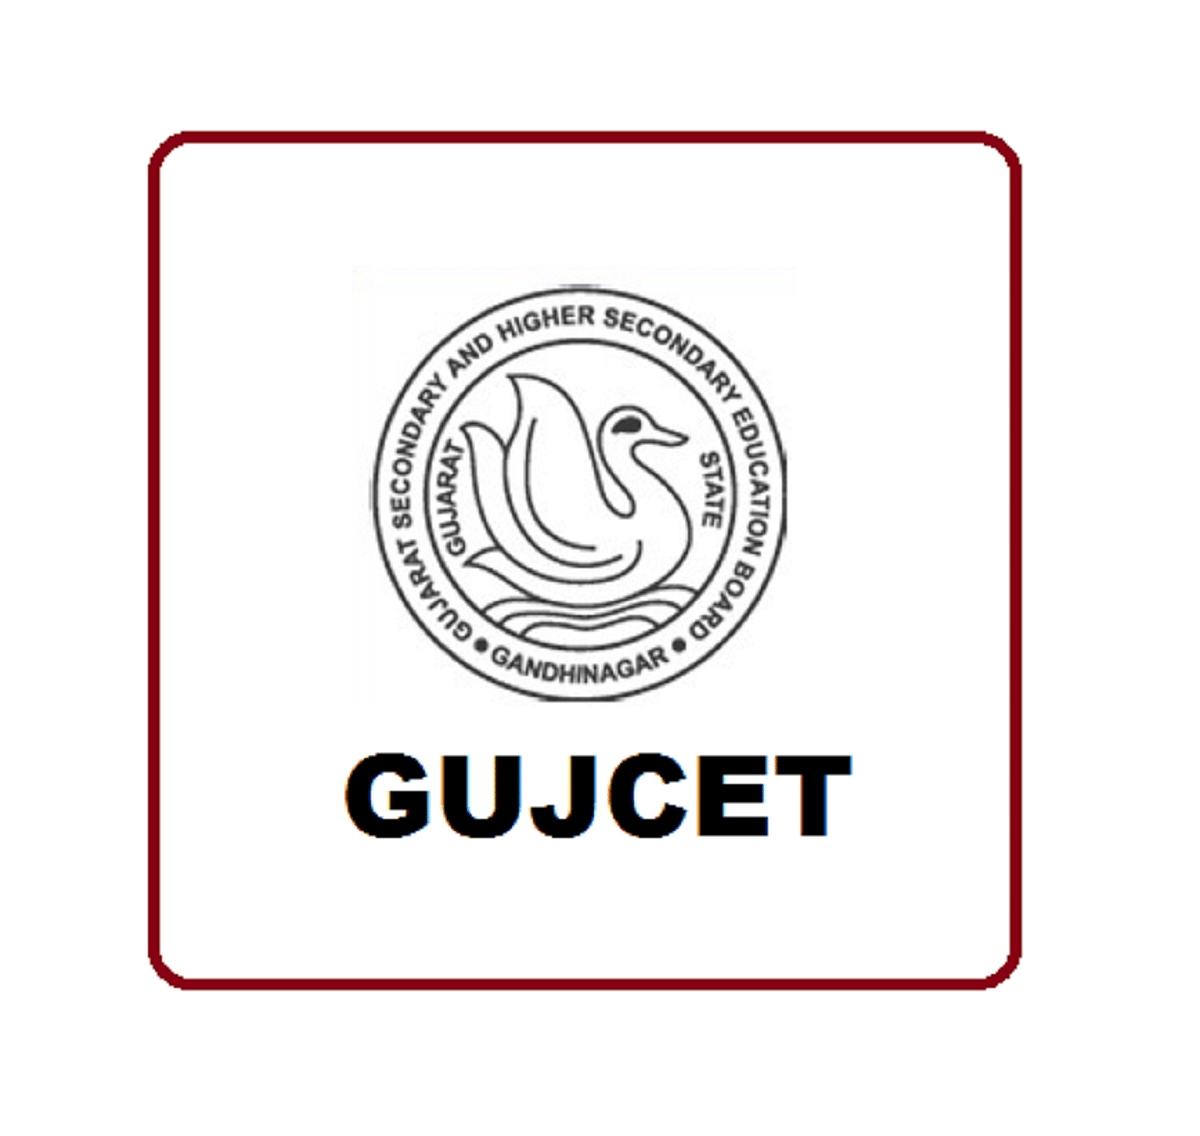 GUJCET 2020 Rescheduled on August 22, Latest Updates Here